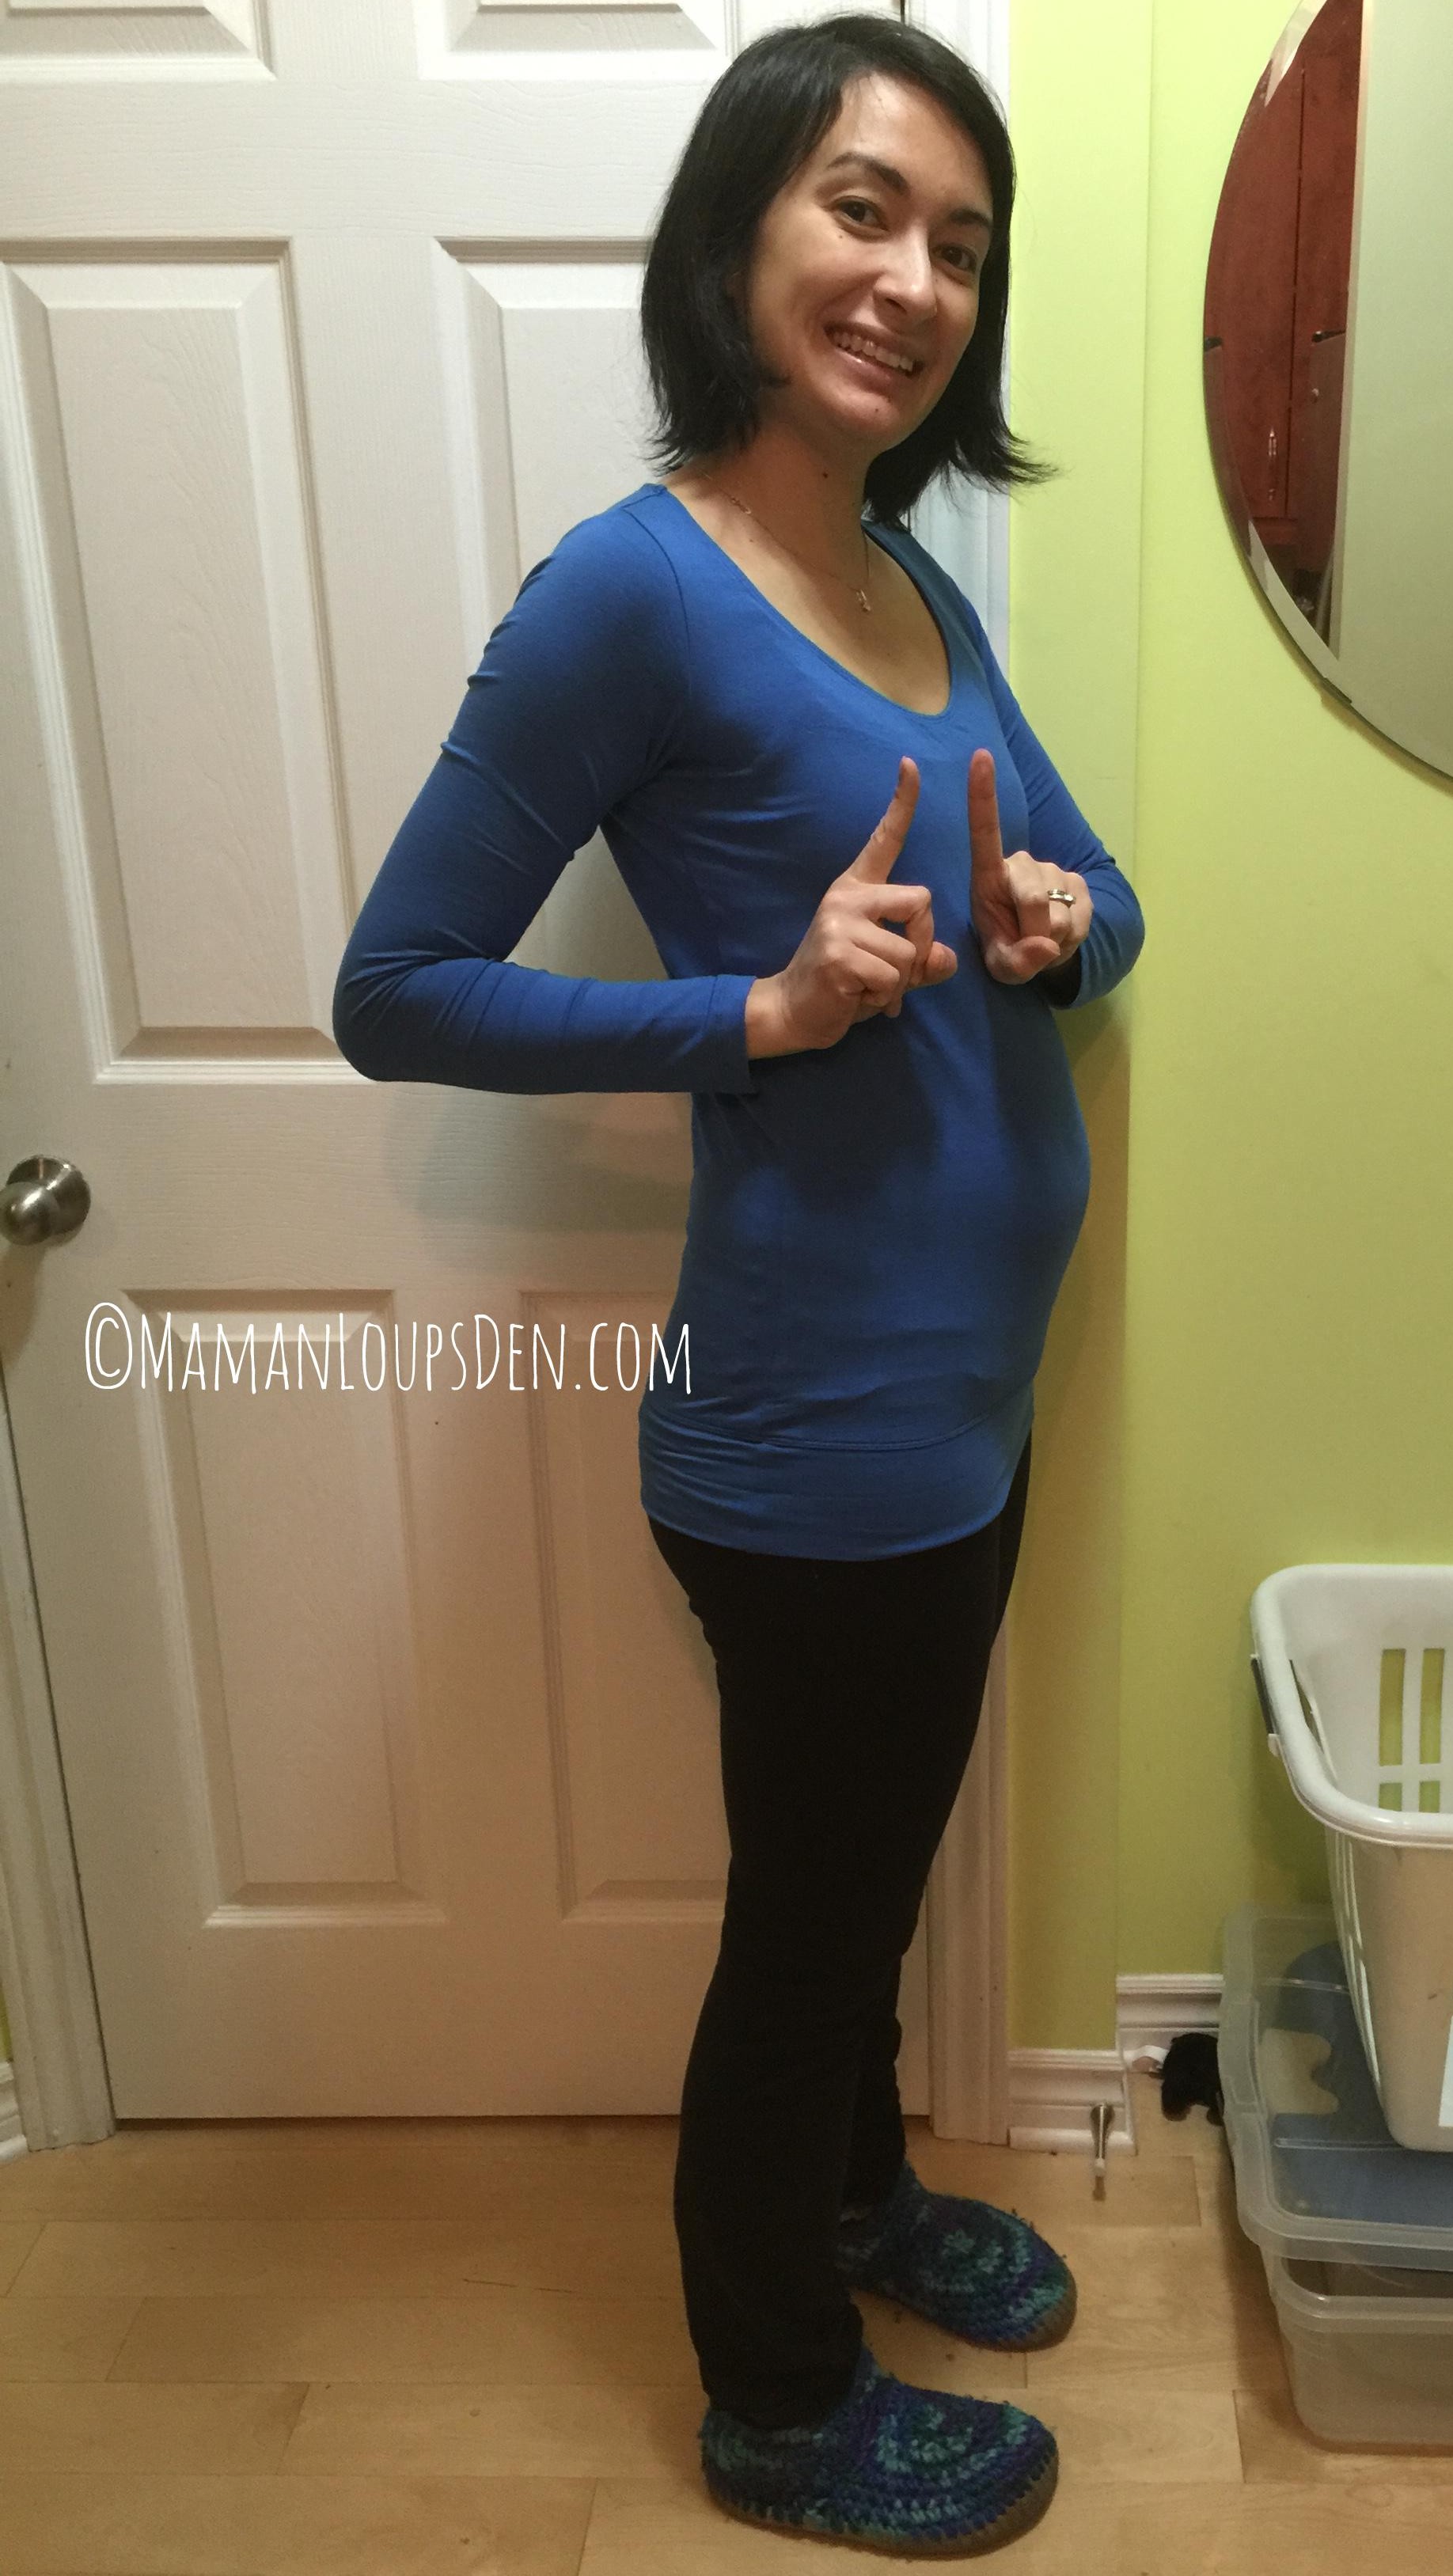 11 weeks pregnant: Ch-ch-changes!